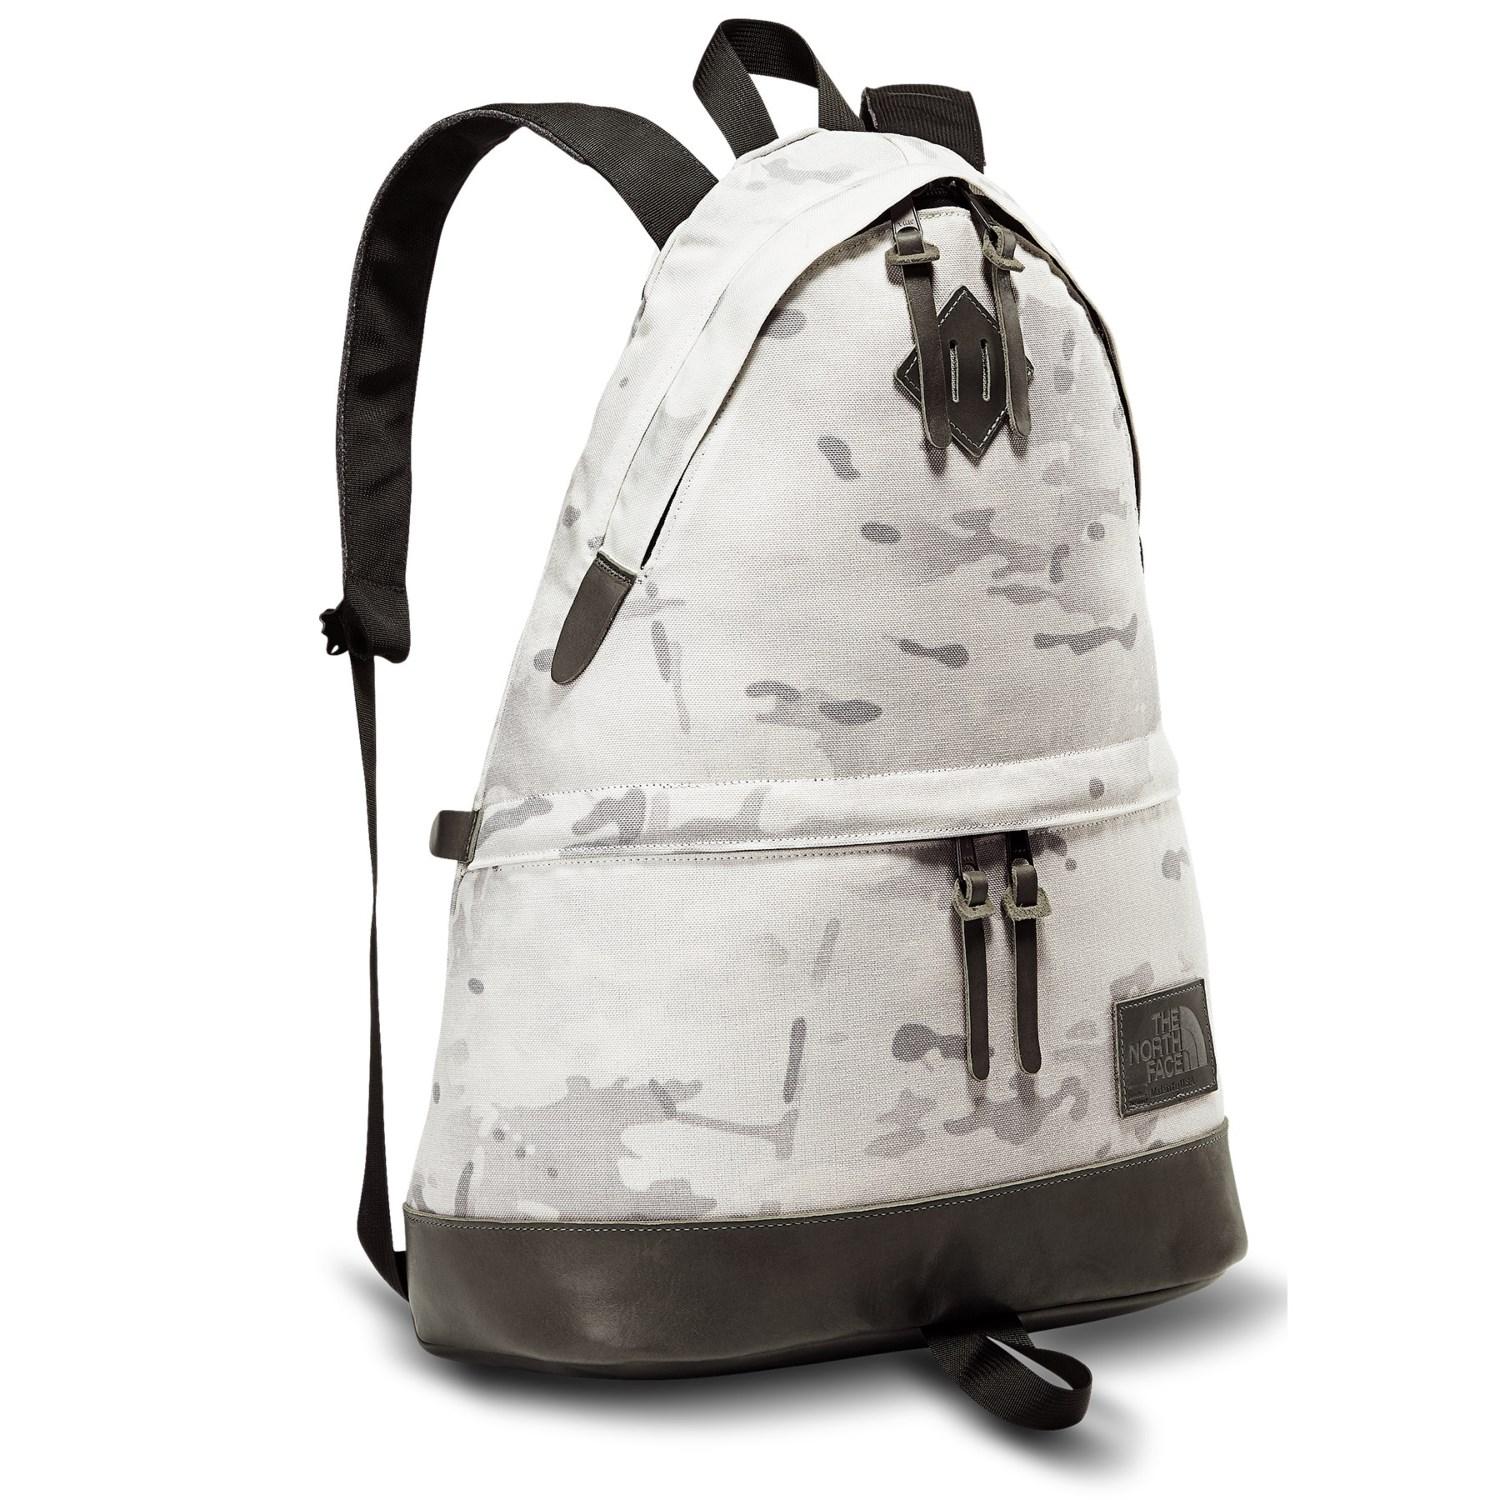 north face 68 daypack